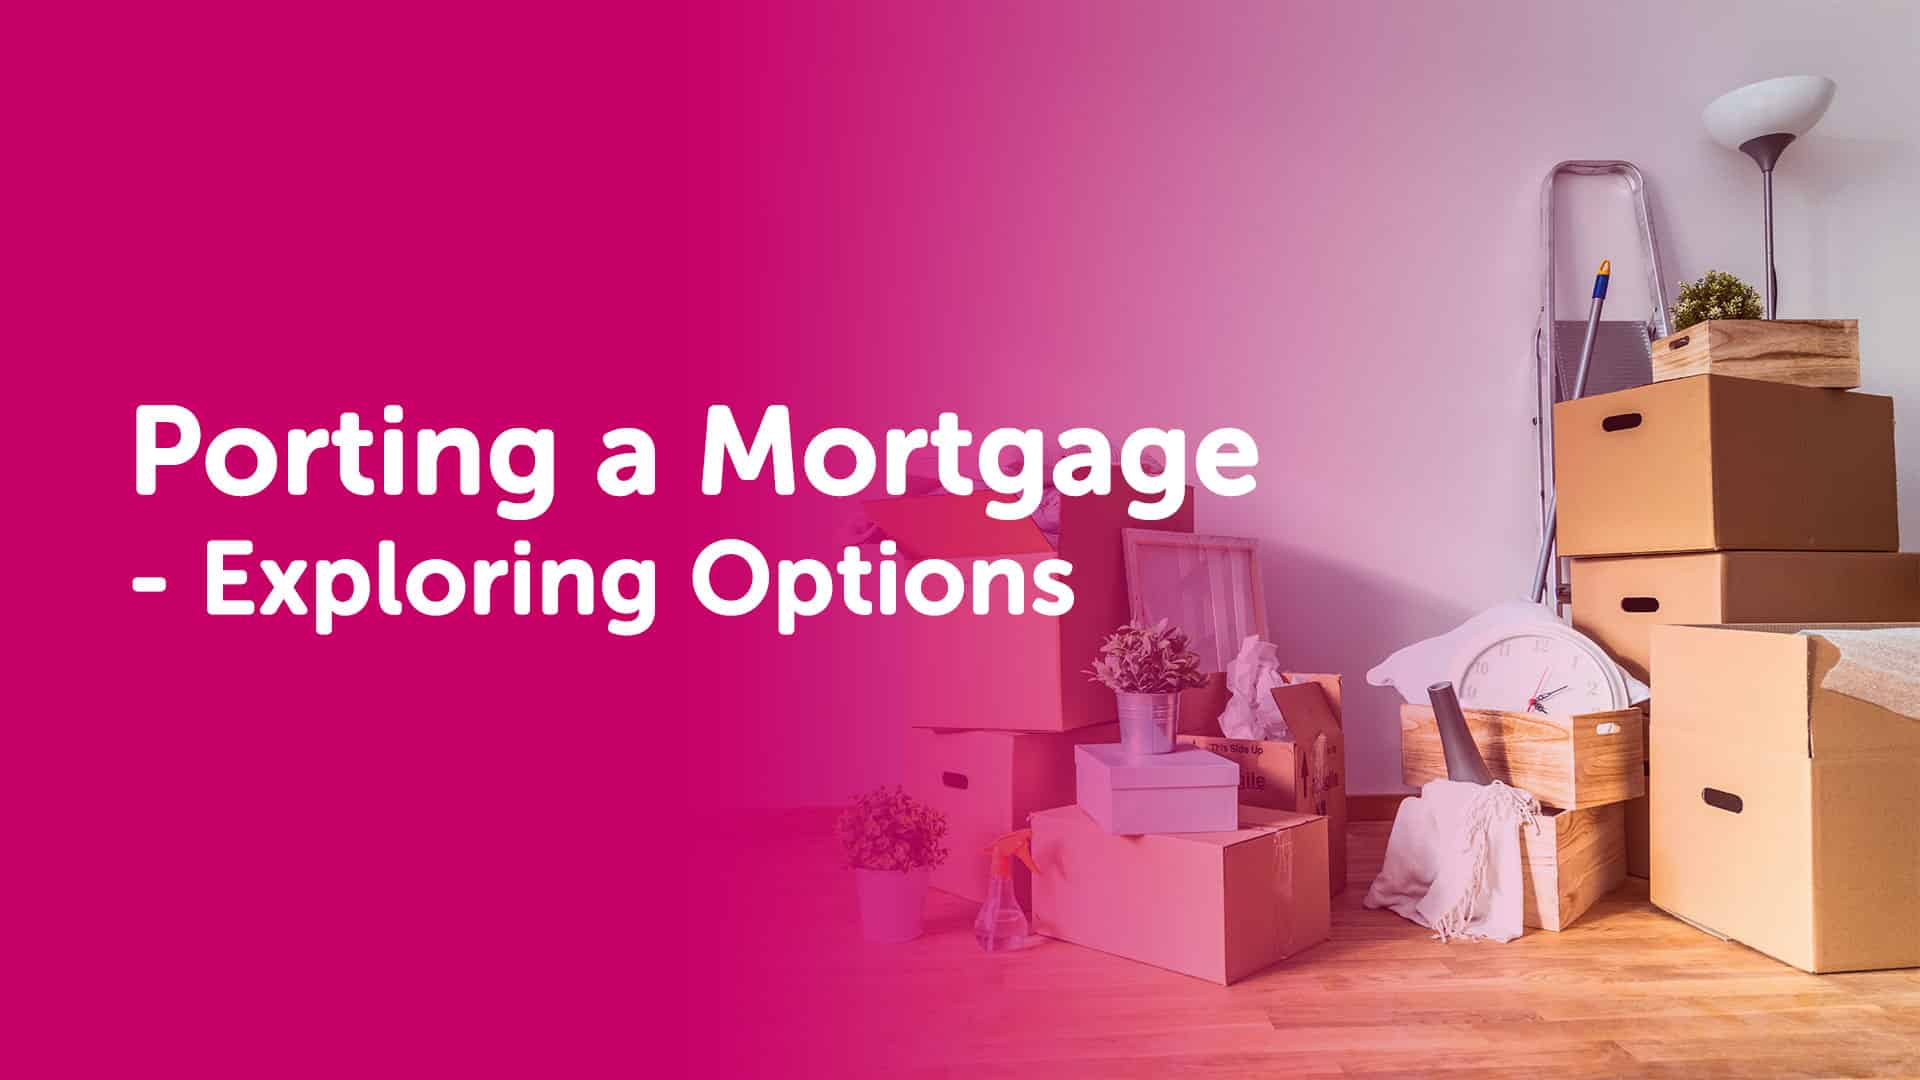 Porting a Mortgage Newcastle